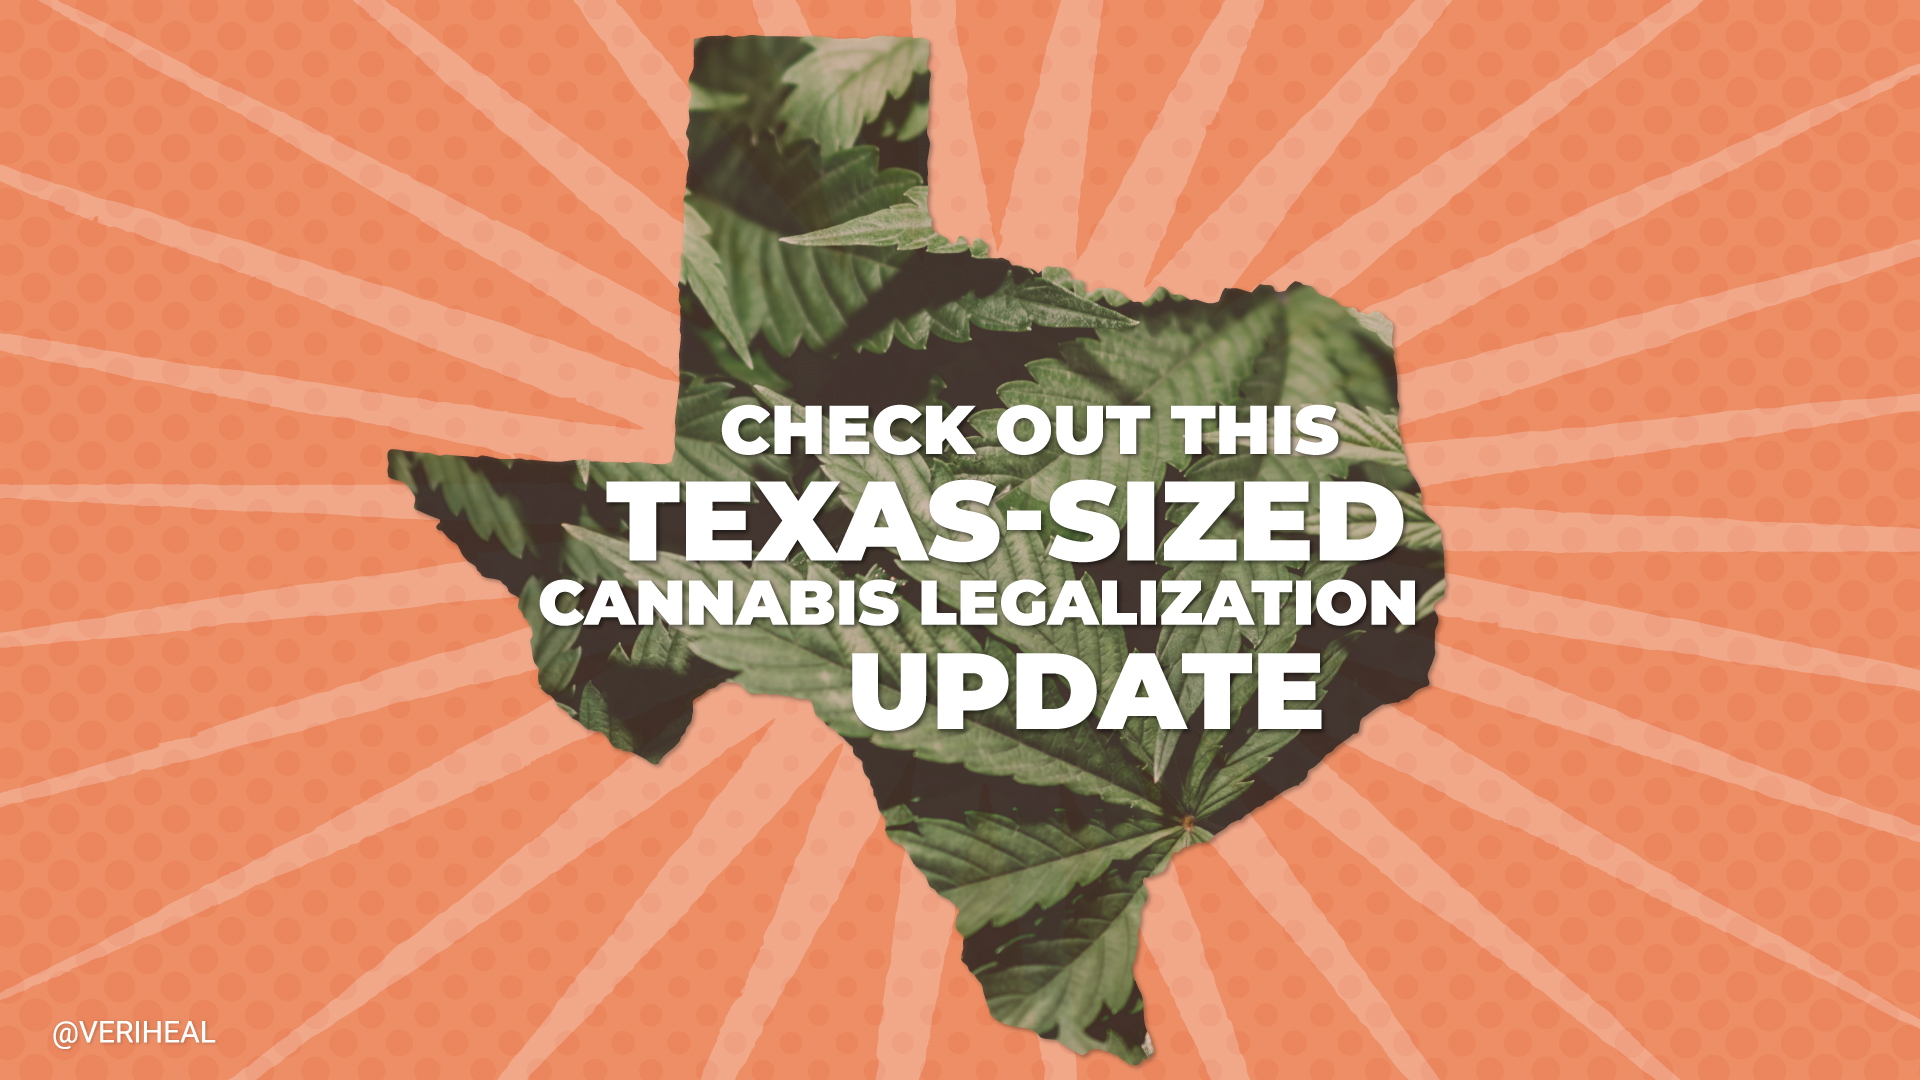 Check Out This Texas-Sized Cannabis Legalization Update